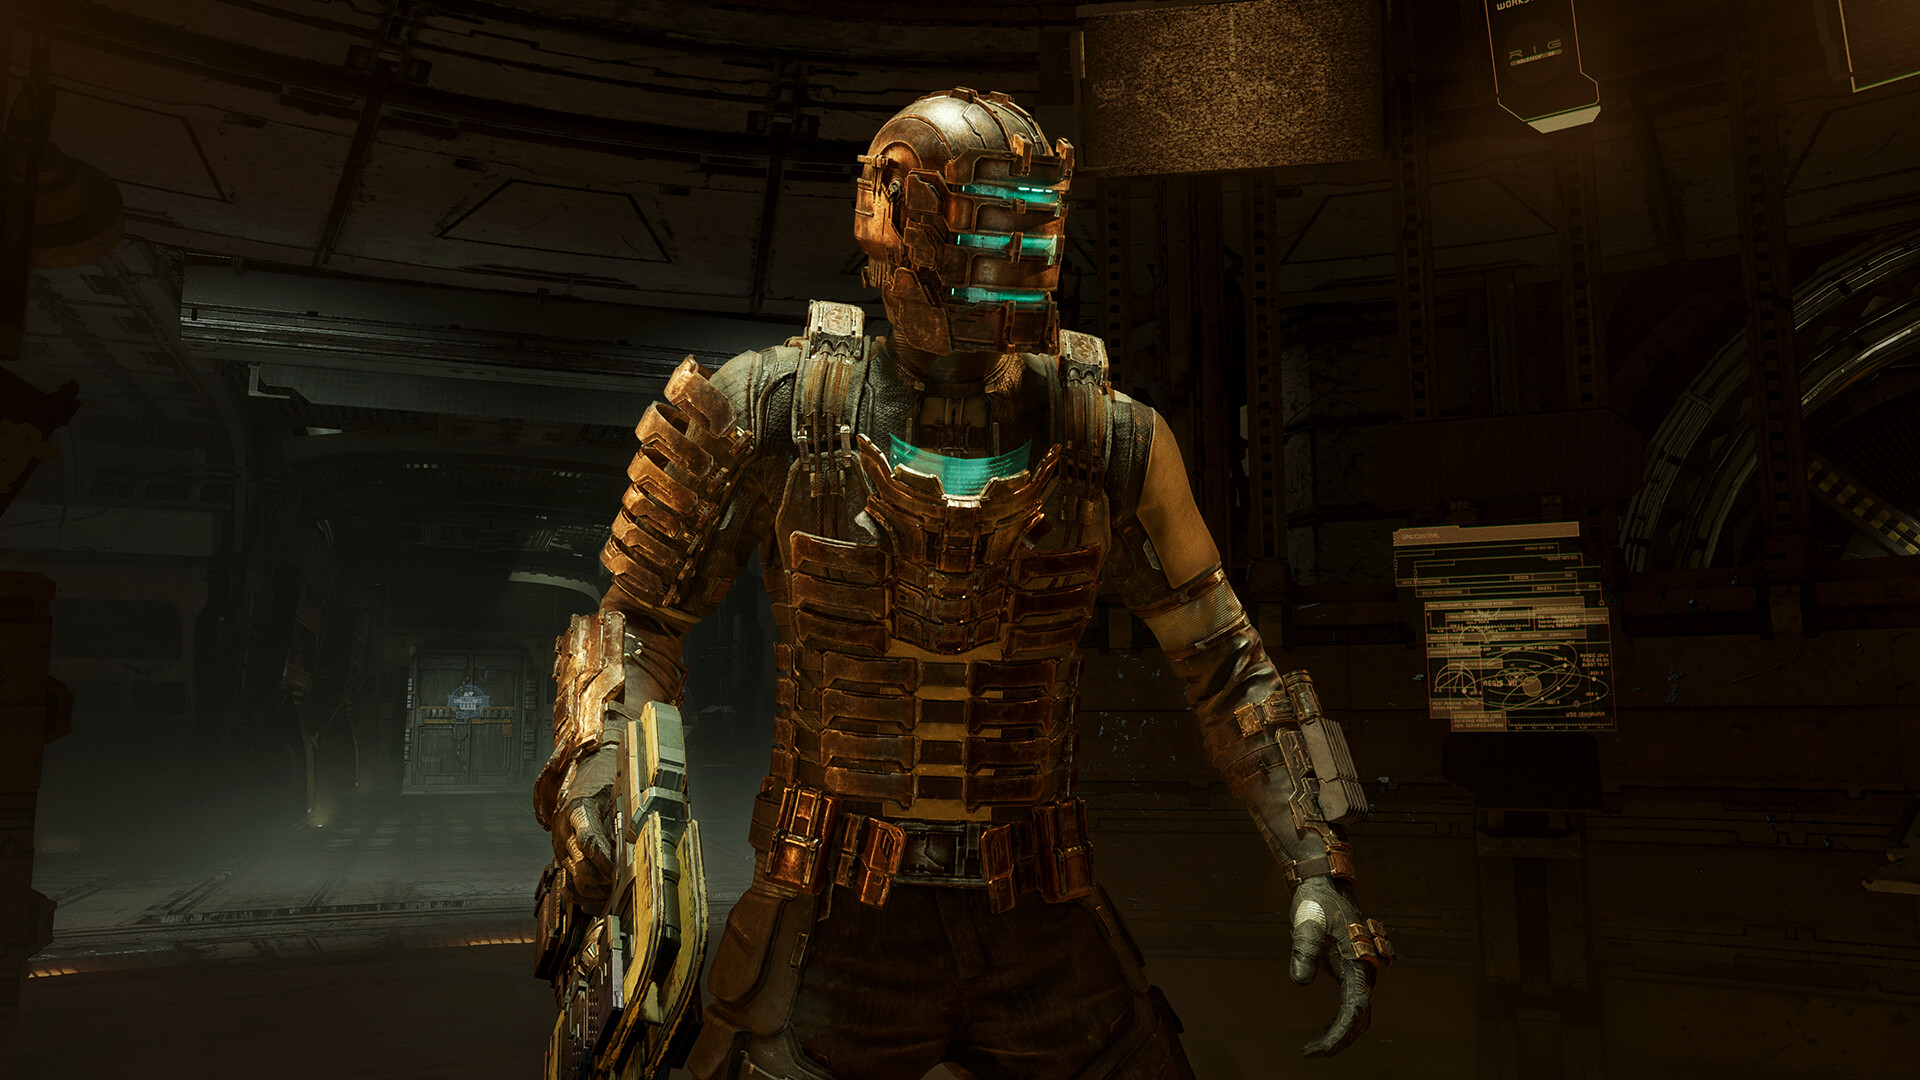 Dead Space remake 'too scary' to play at night, says developer